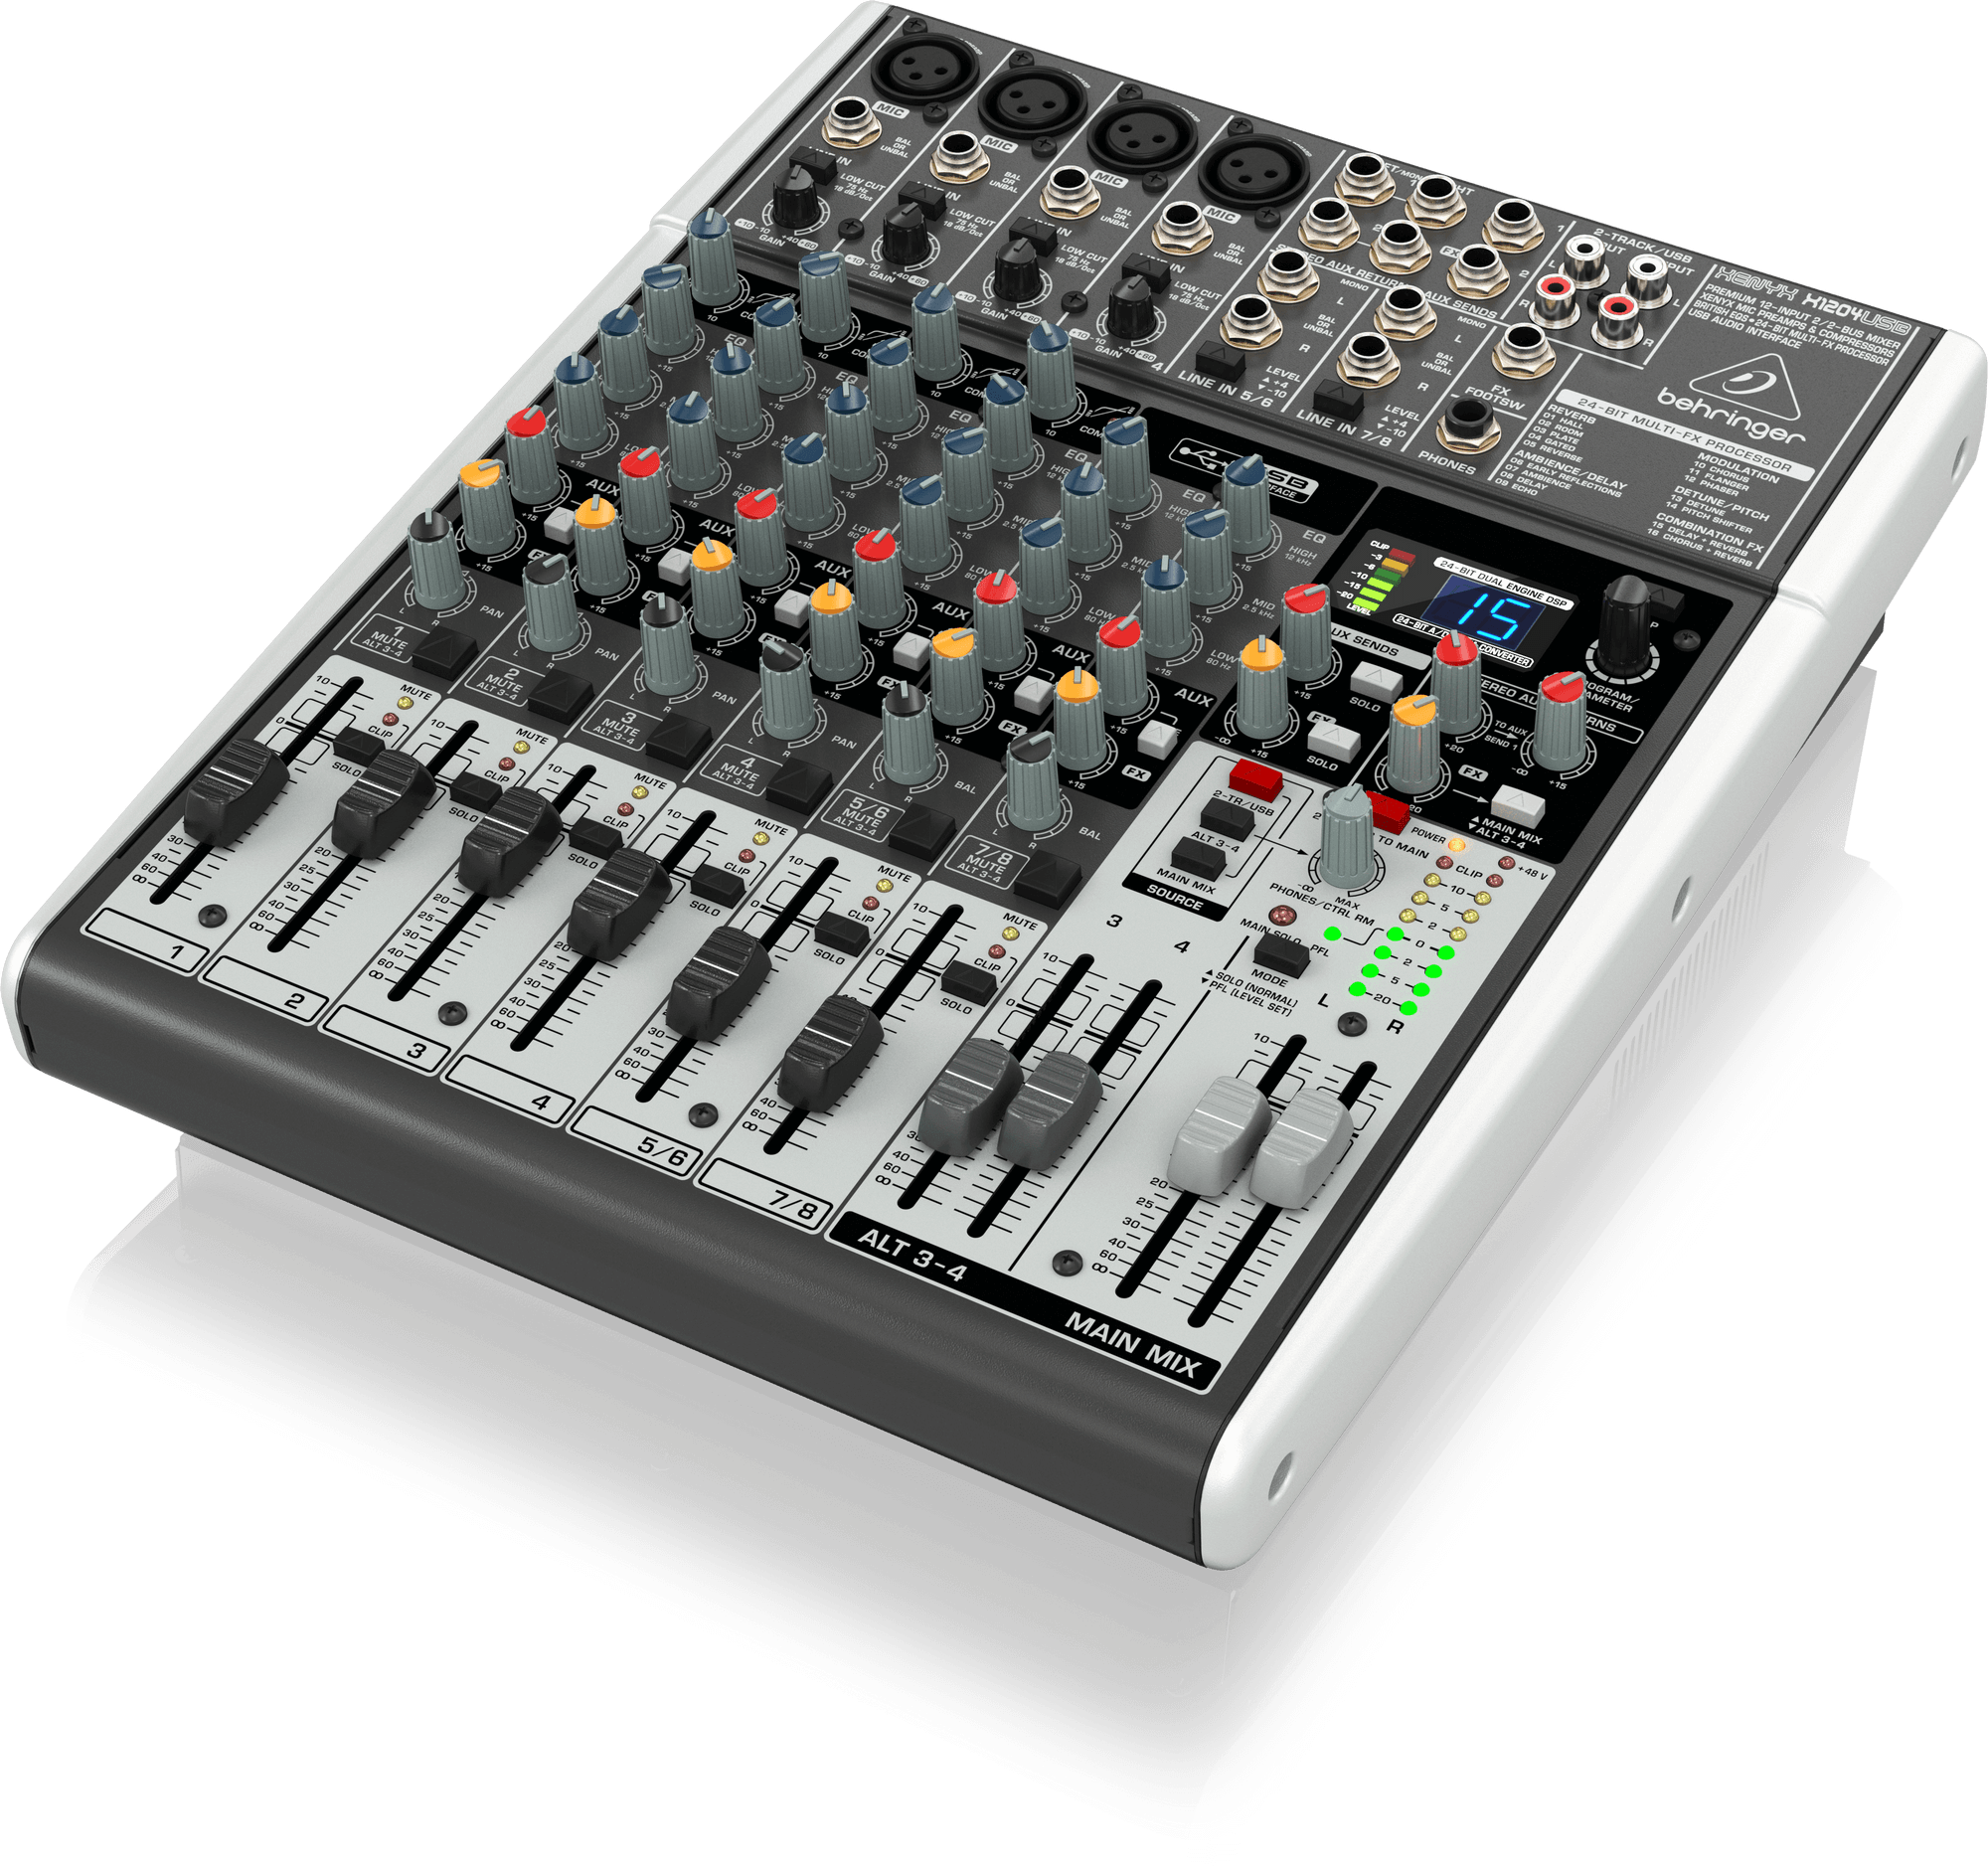 Behringer XENYX X1204USB 12-Input USB Audio Mixer with Effects and Dynamic Microphone Closed-Back Headphones and Platinum Bundle 